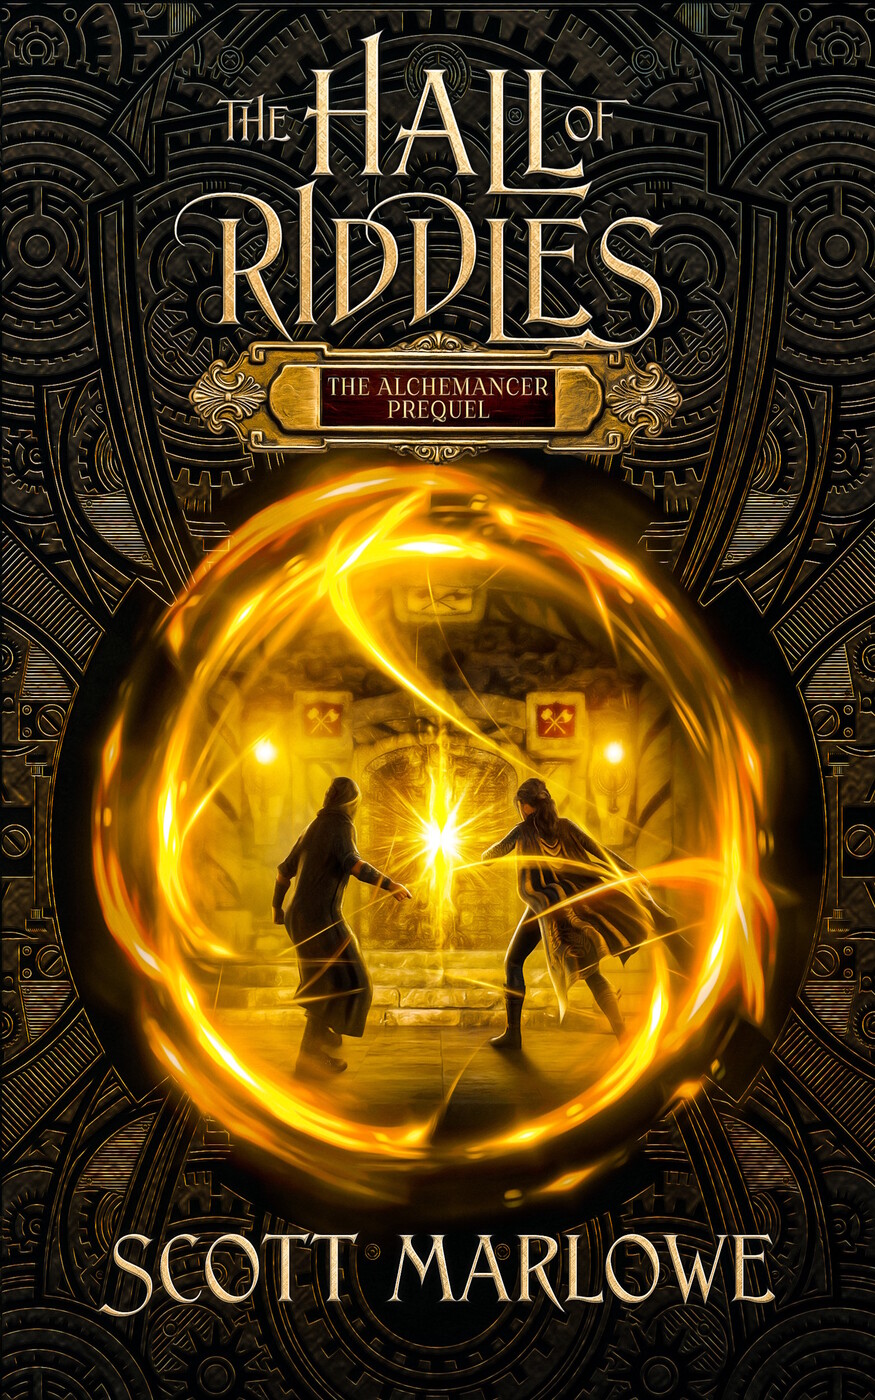 The Hall of Riddles new cover and available to purchase